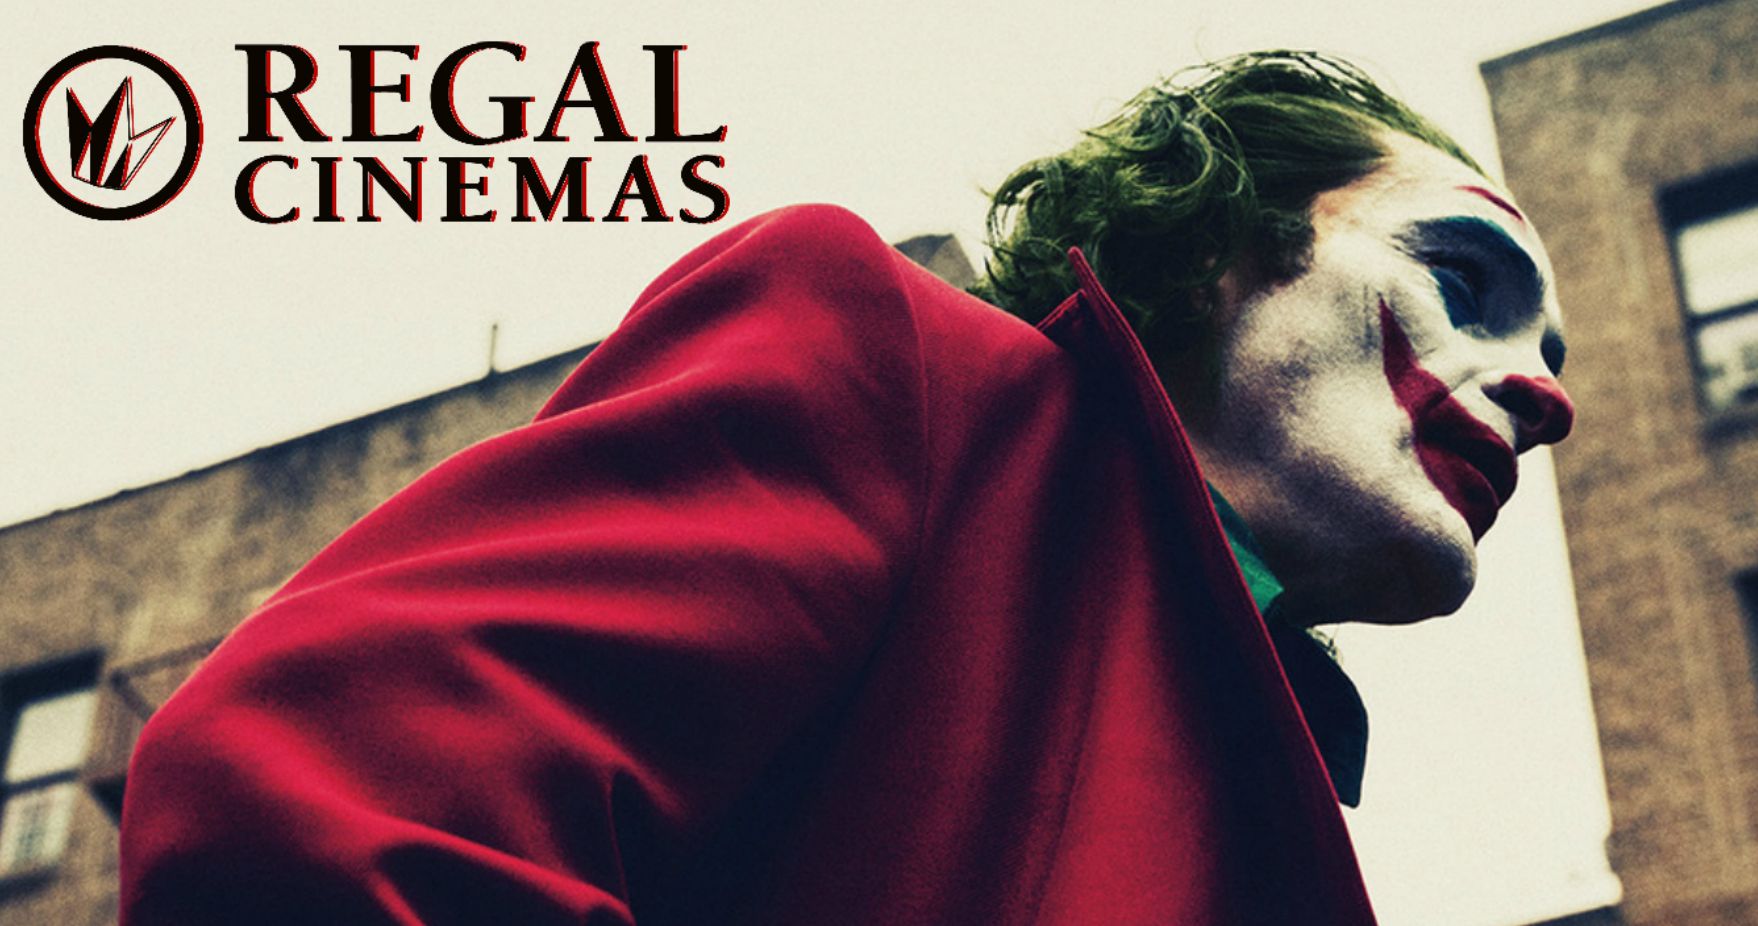 Regal Cinemas Issue Official Joker Statement on Violence and Theater Safety